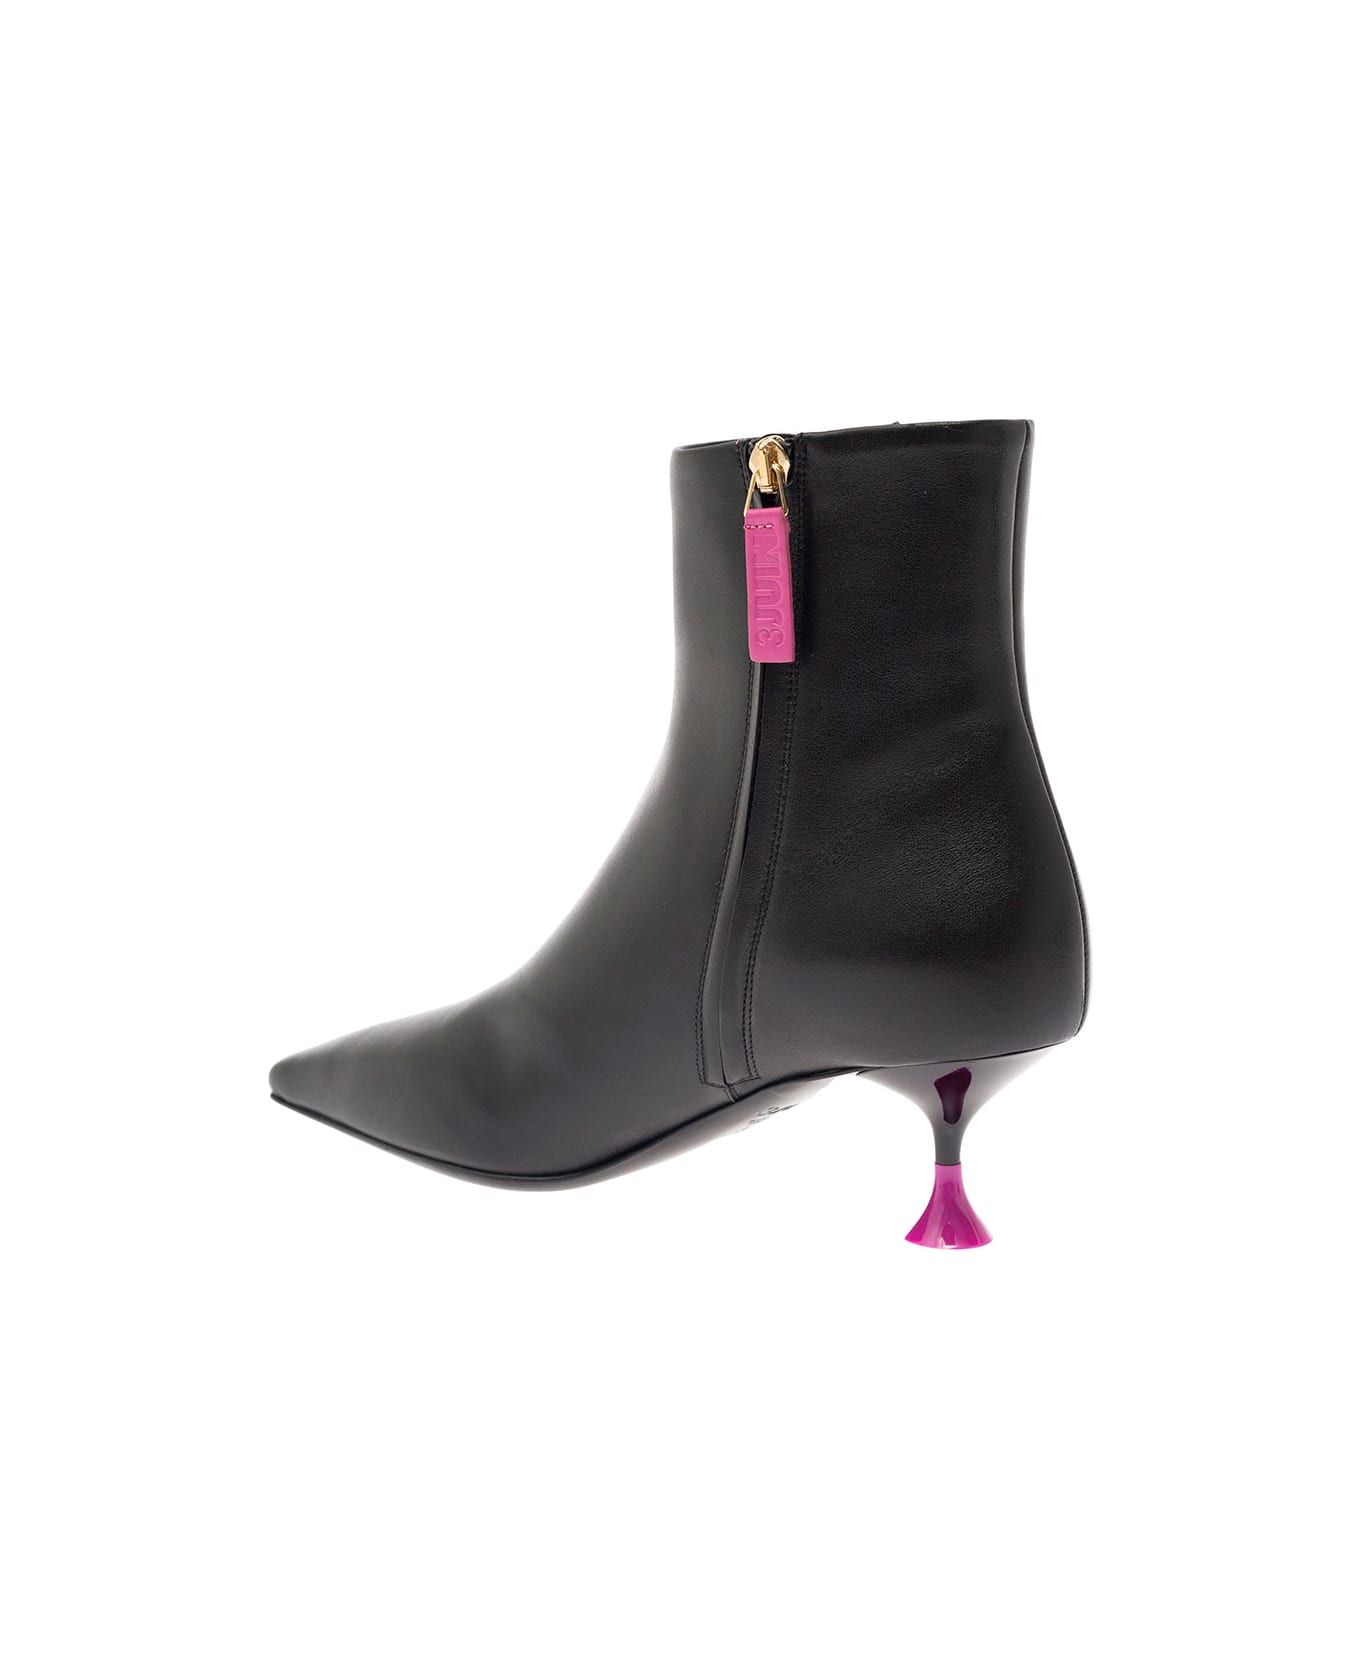 3JUIN Black Ankle Boots With Zip And Contrasting Heel In Leather Woman - Black